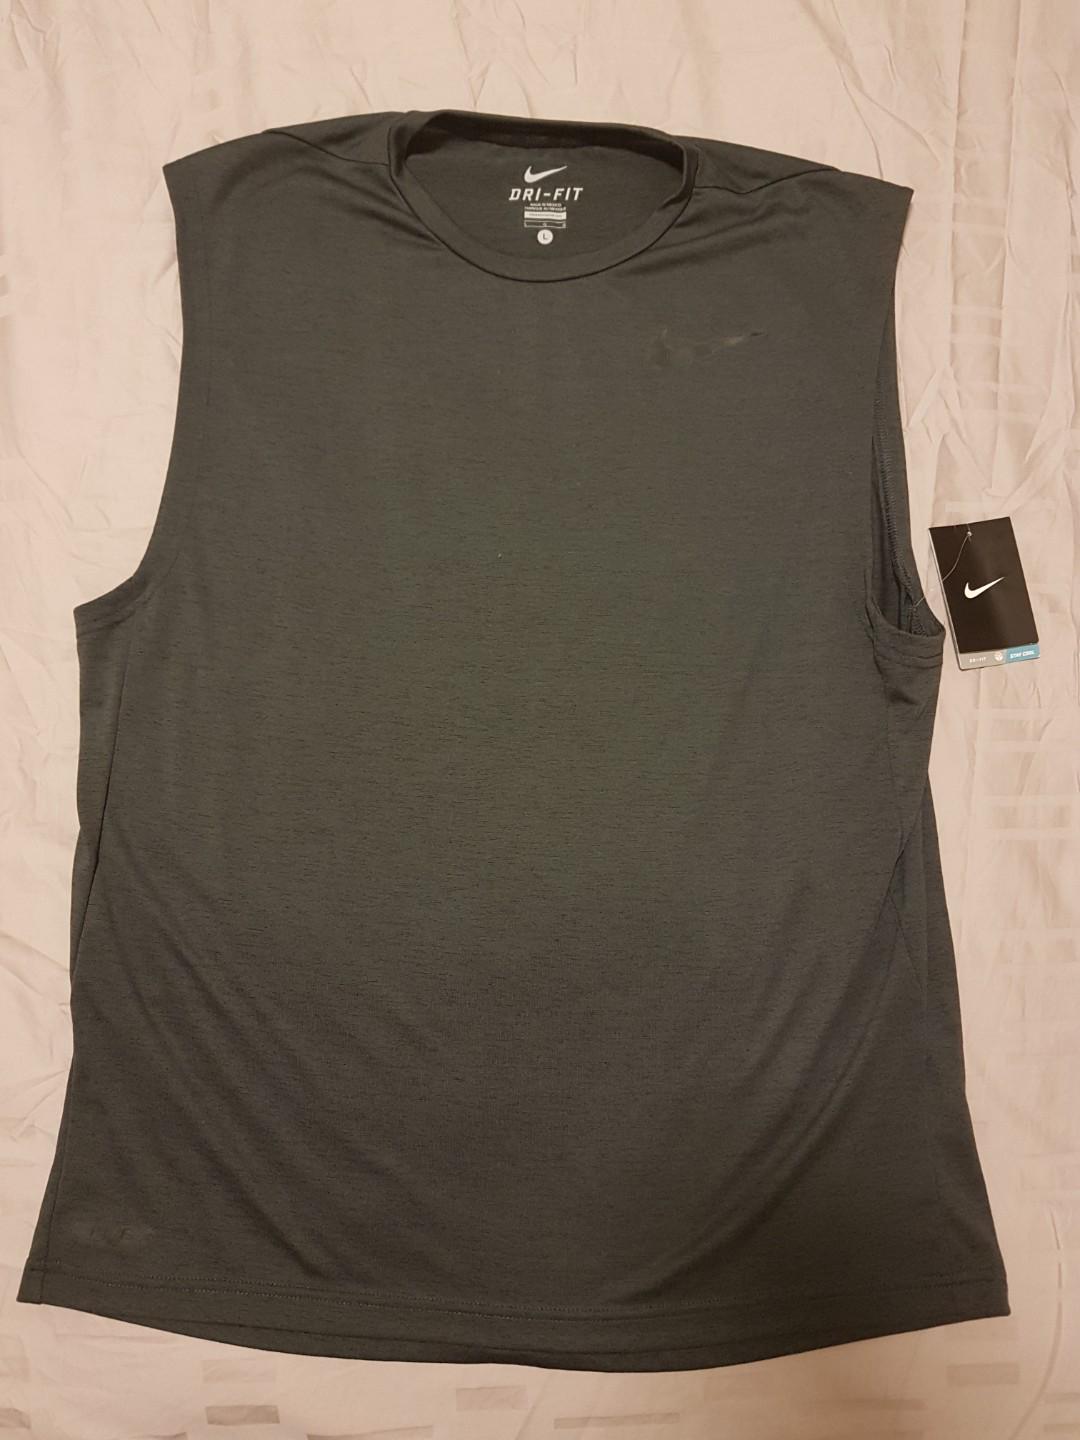 Nike Dri Fit Vest Men S Fashion Clothes Tops On Carousell